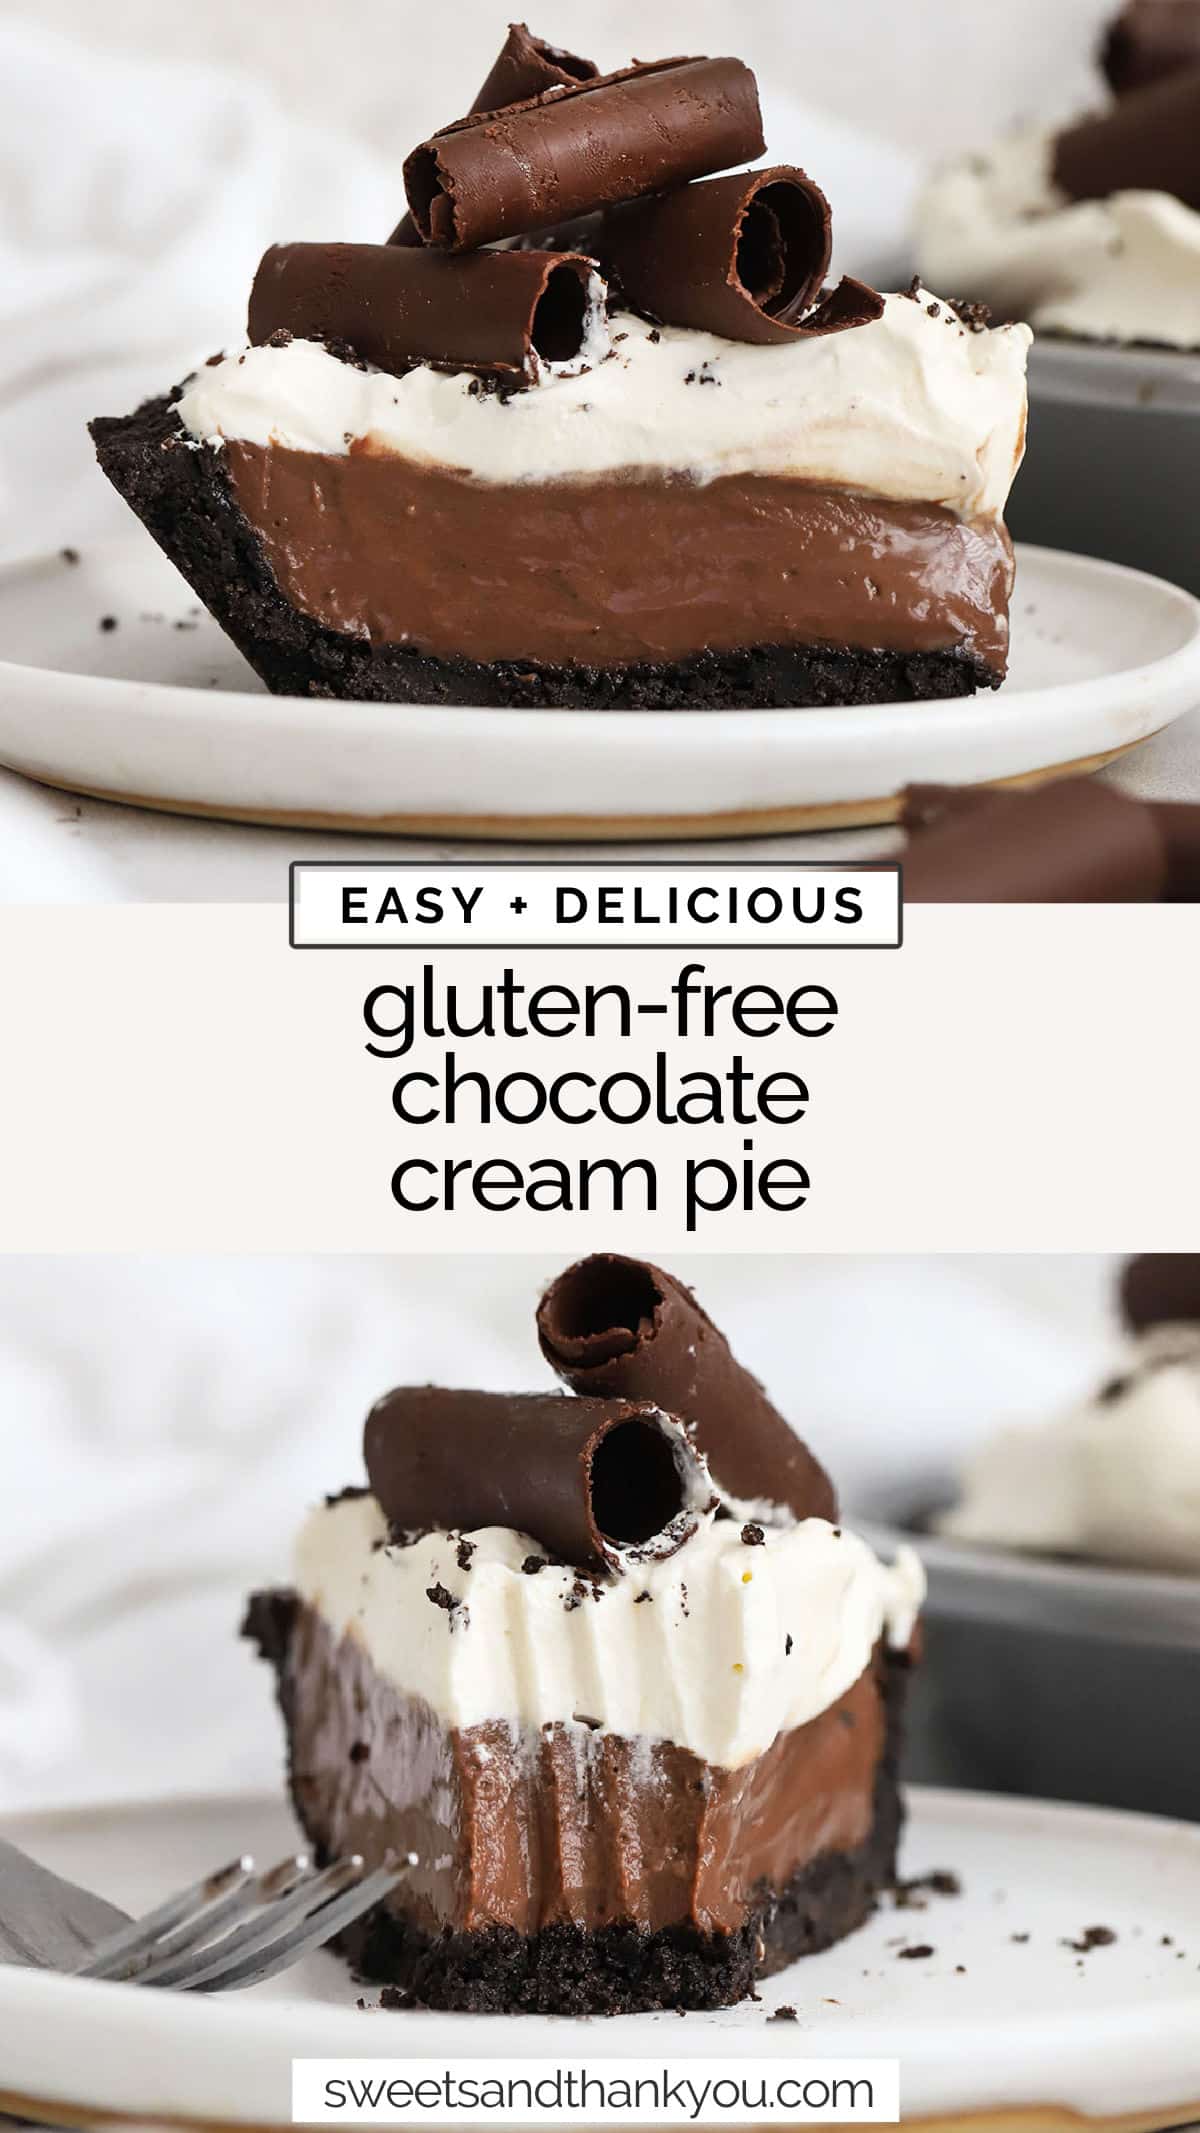 This easy gluten-free chocolate pie recipe is made with an easy chocolate cookie crust, decadent chocolate pudding pie filling, and fluffy whipped cream. It's probably the most popular gluten-free Thanksgiving pie recipe we ever serve, though this gluten-free chocolate cream pie is amazing for birthdays, holidays & celebrations, too! 